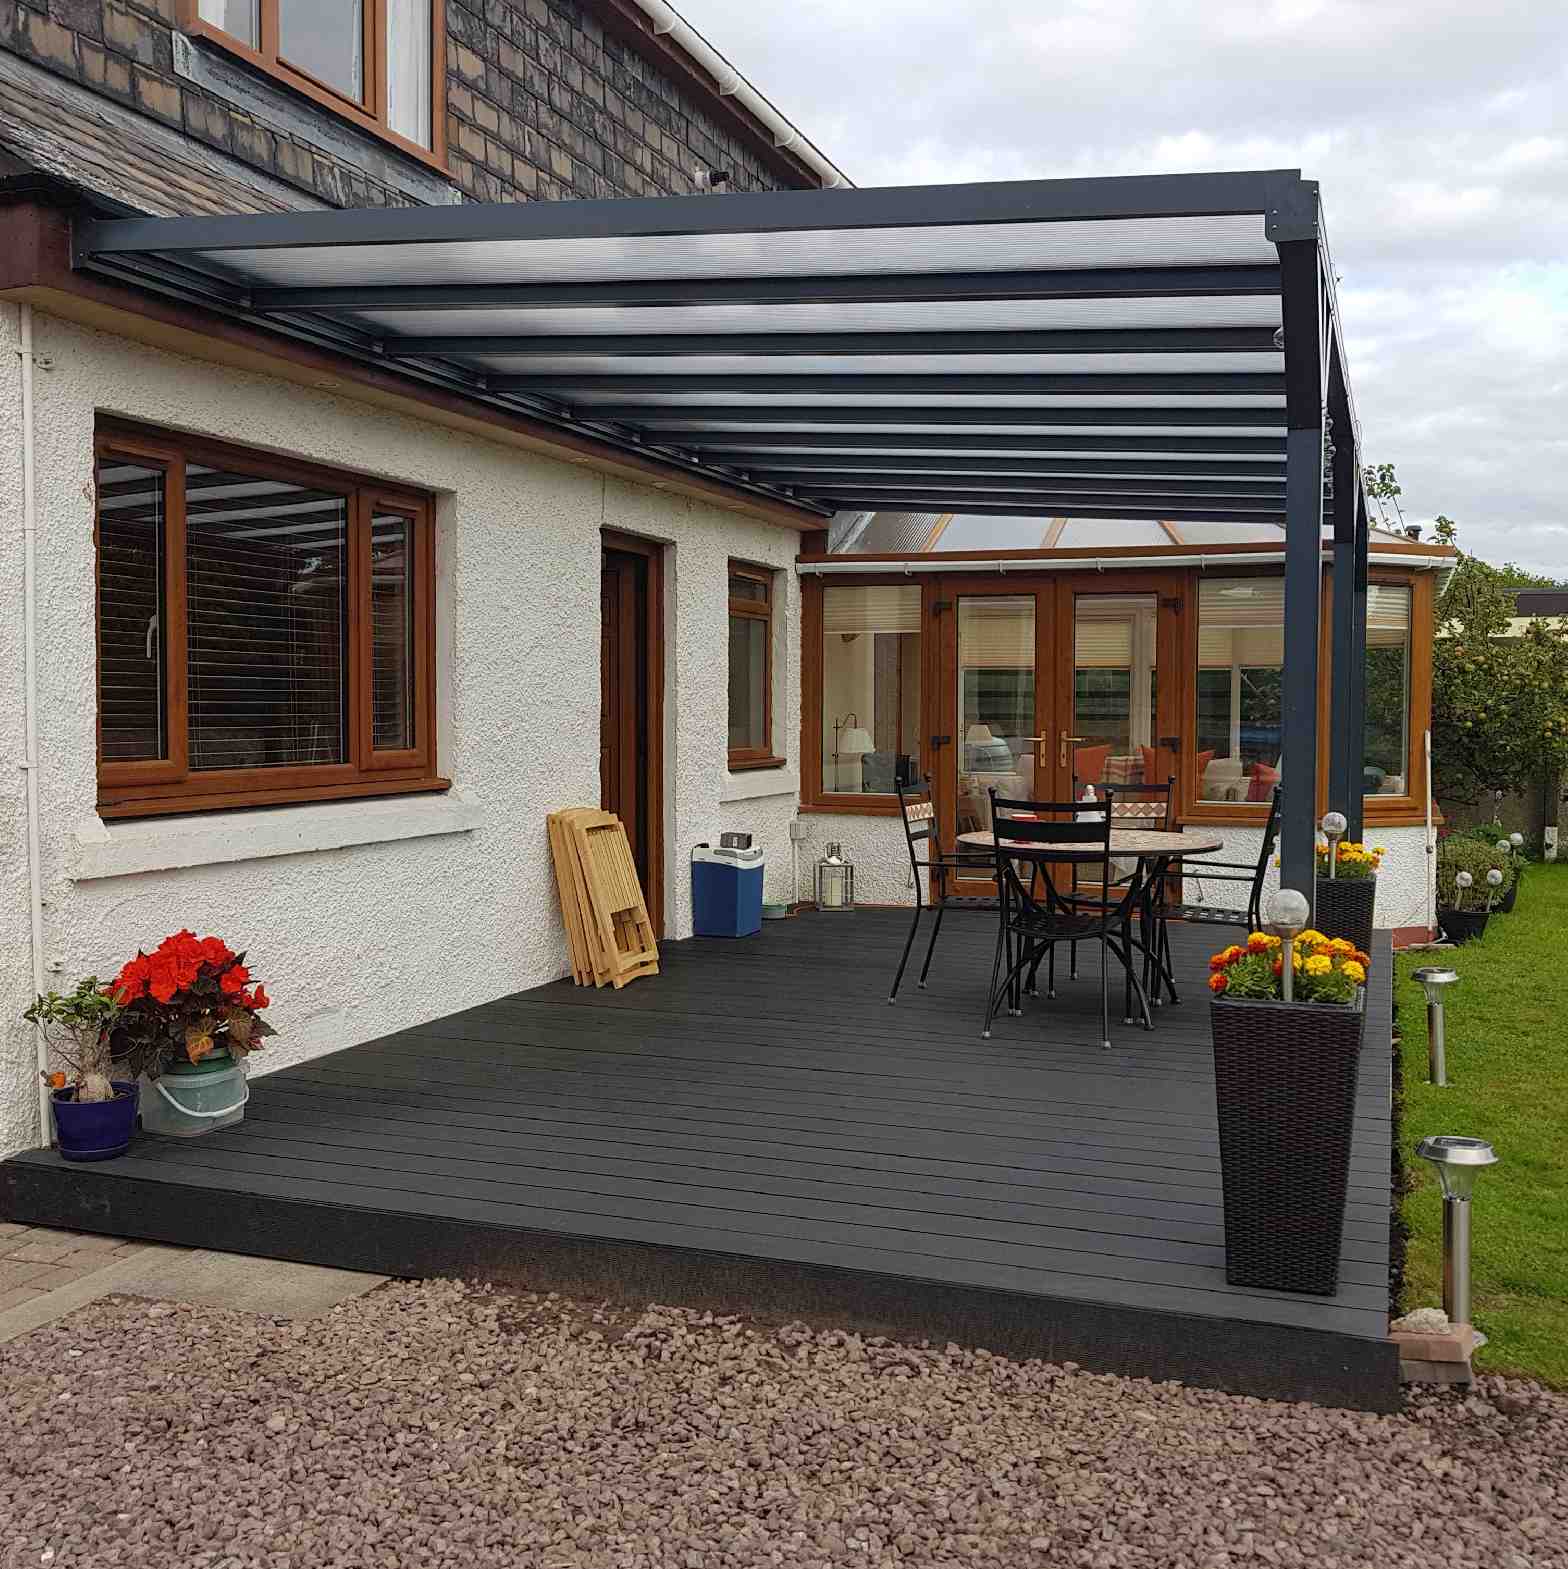 Buy Omega Verandah, Anthracite Grey, 16mm Polycarbonate Glazing - 5.6m (W) x 4.0m (P), (3) Supporting Posts online today